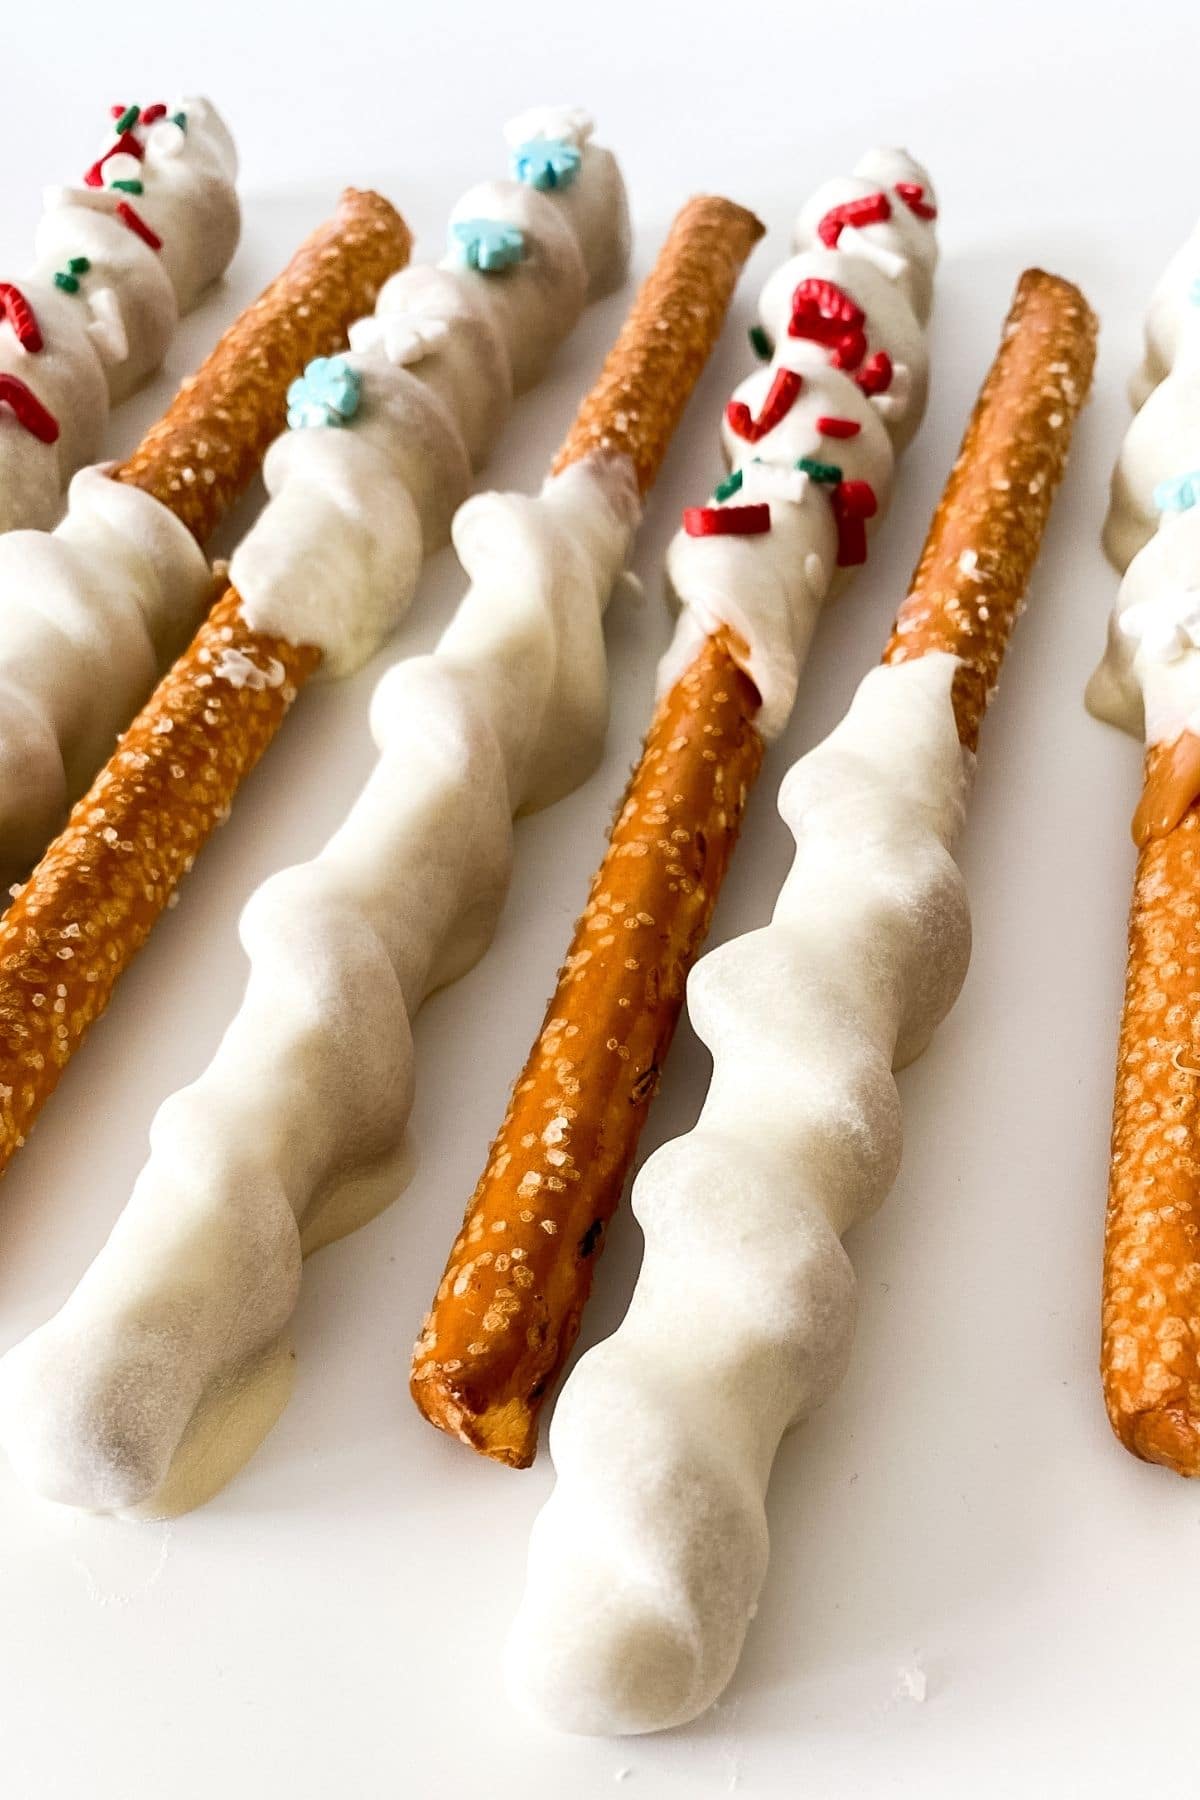 Dipped pretzels on white surface